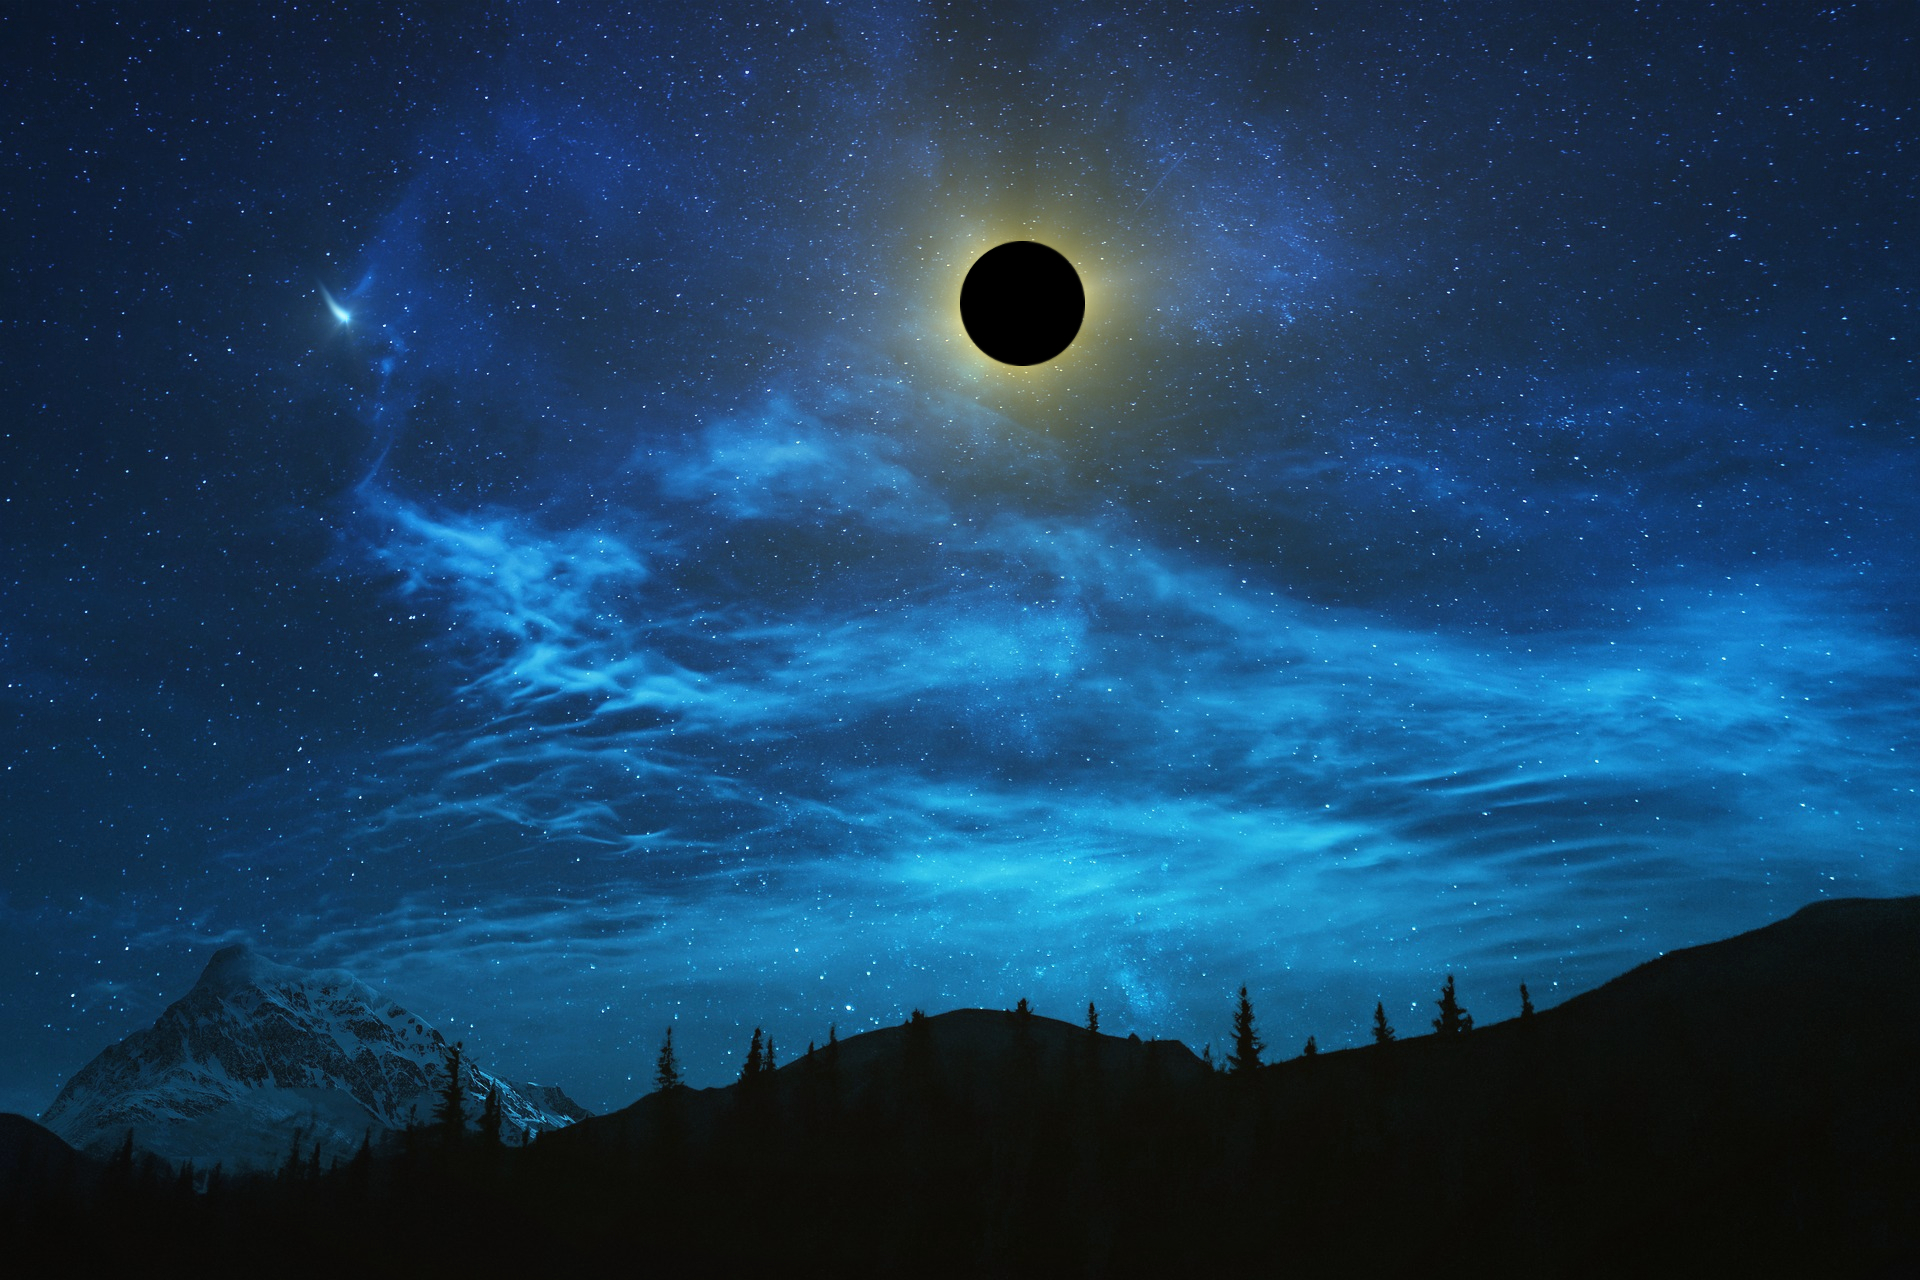 Azure-hued skies set the stage for the mesmerizing Solar Eclipse over a majestic mountain range.